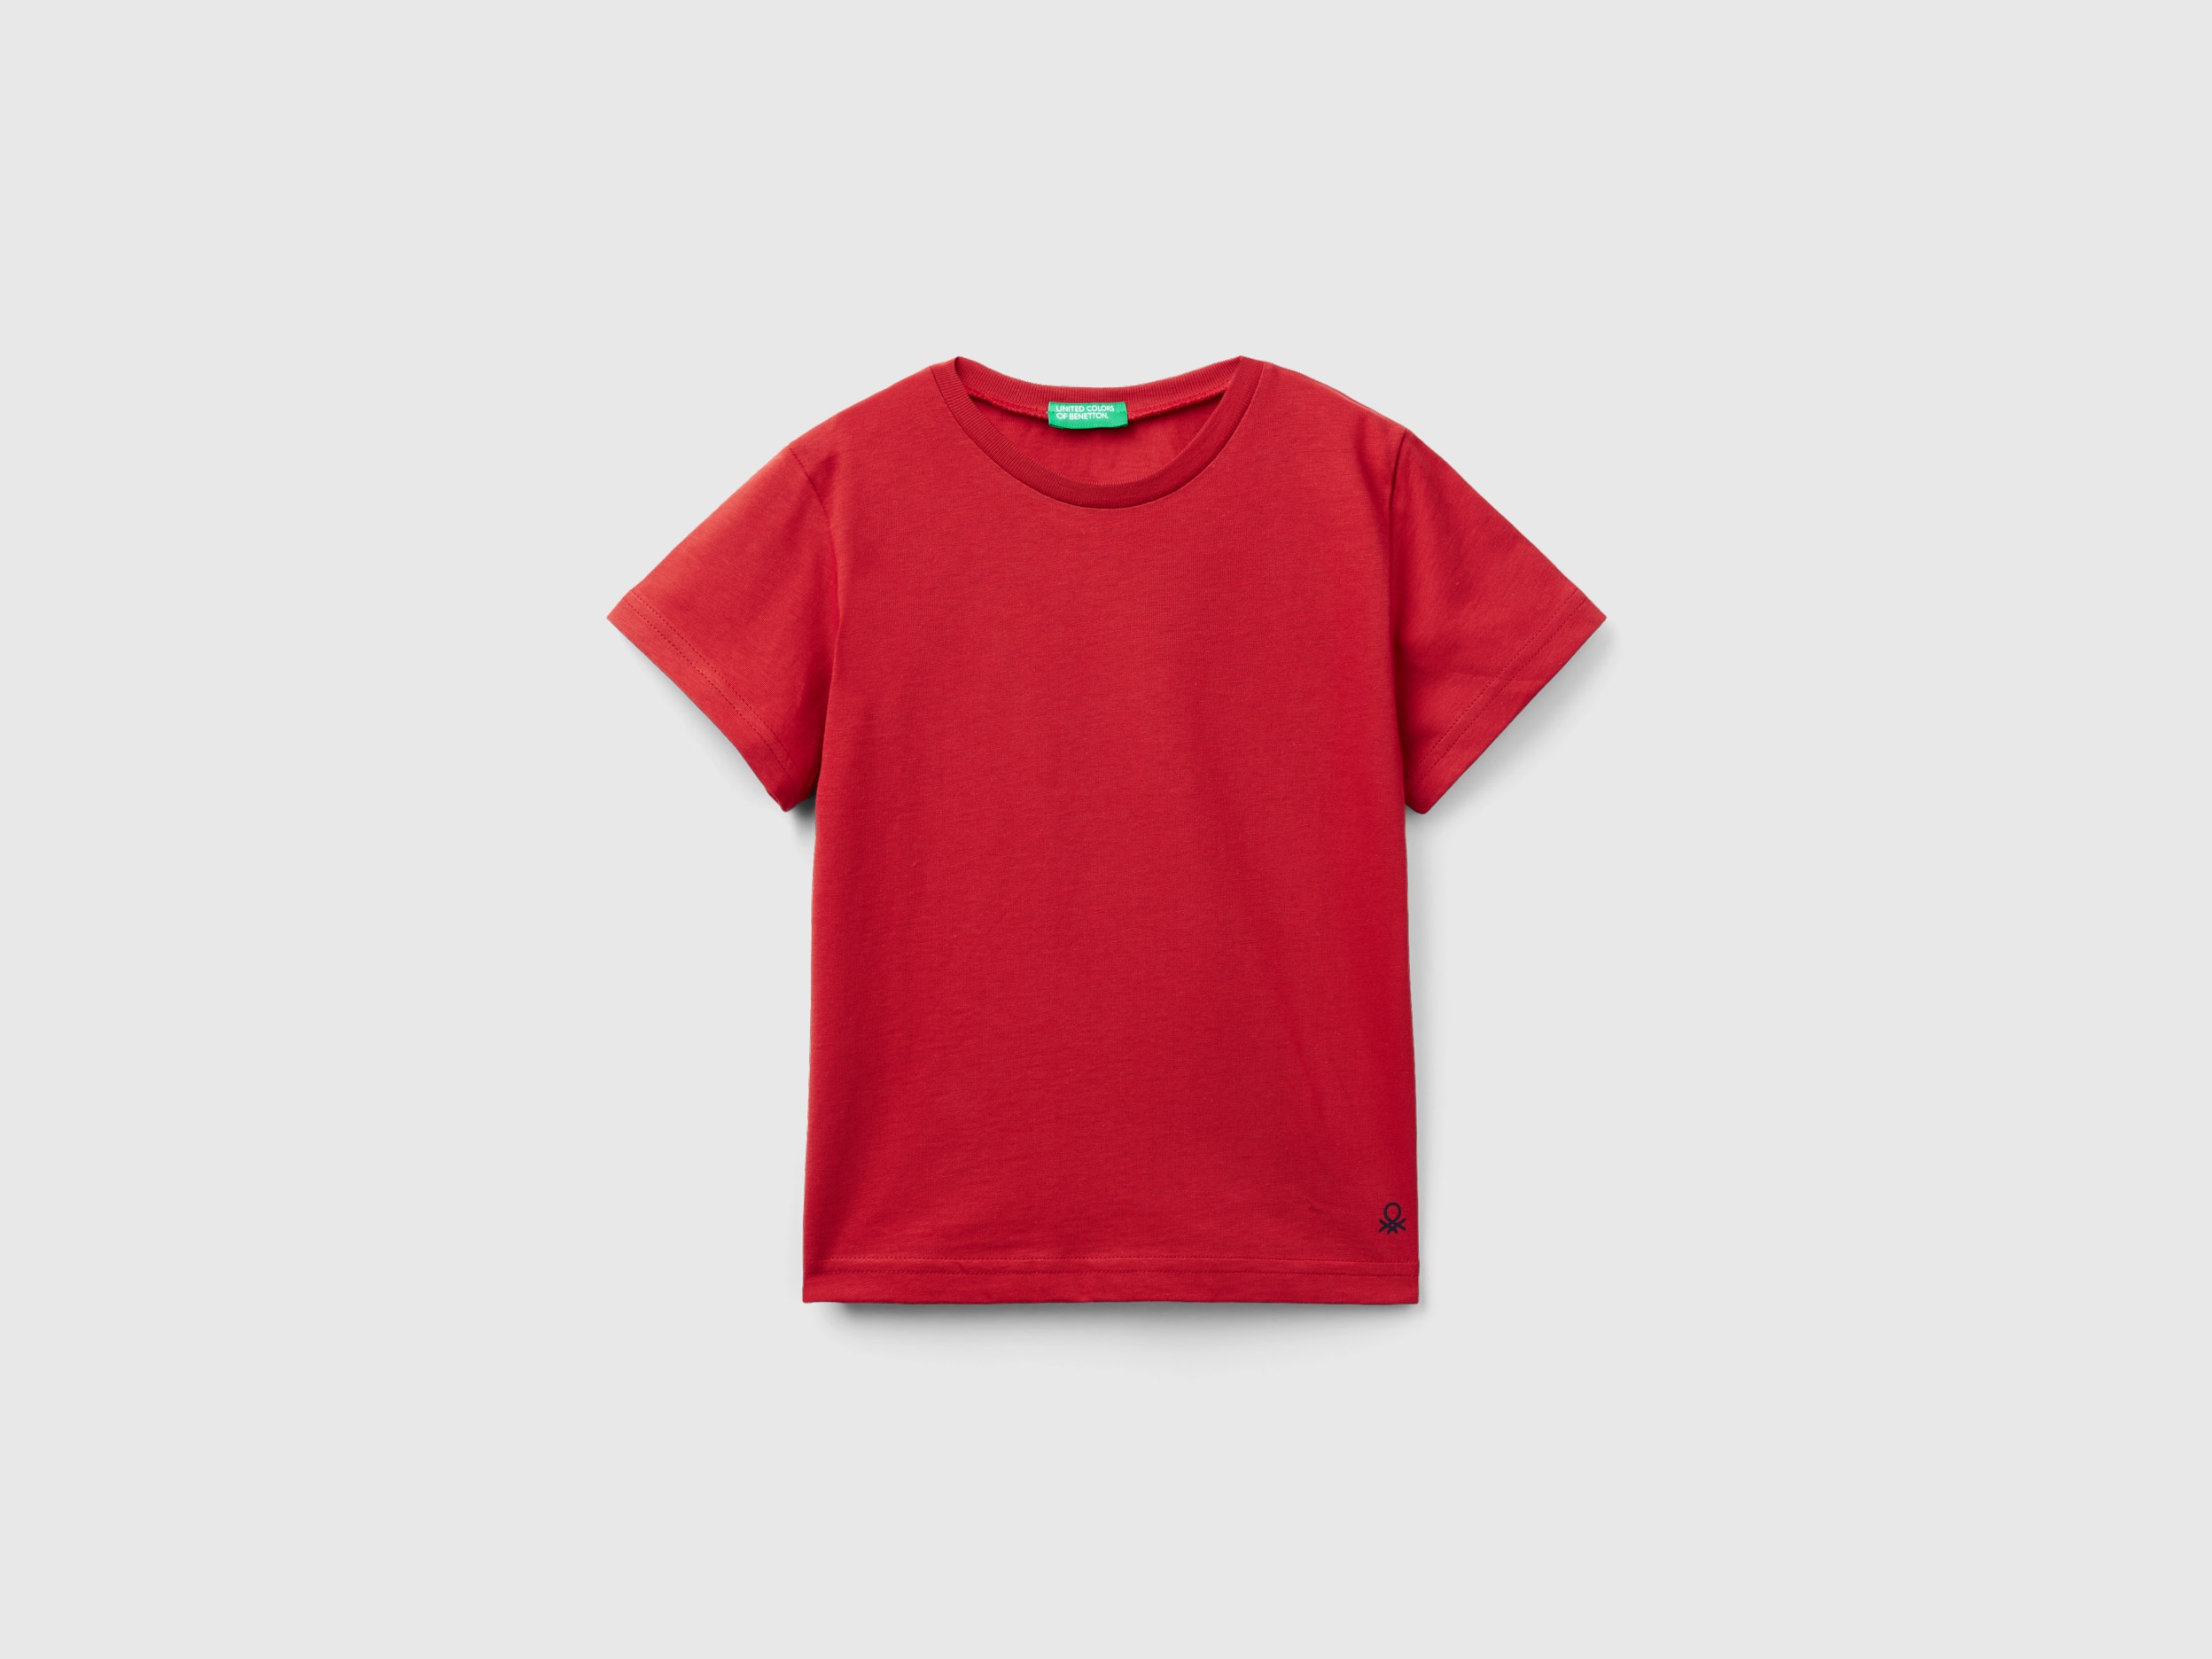 Image of Benetton, T-shirt In Organic Cotton, size 98, Brick Red, Kids